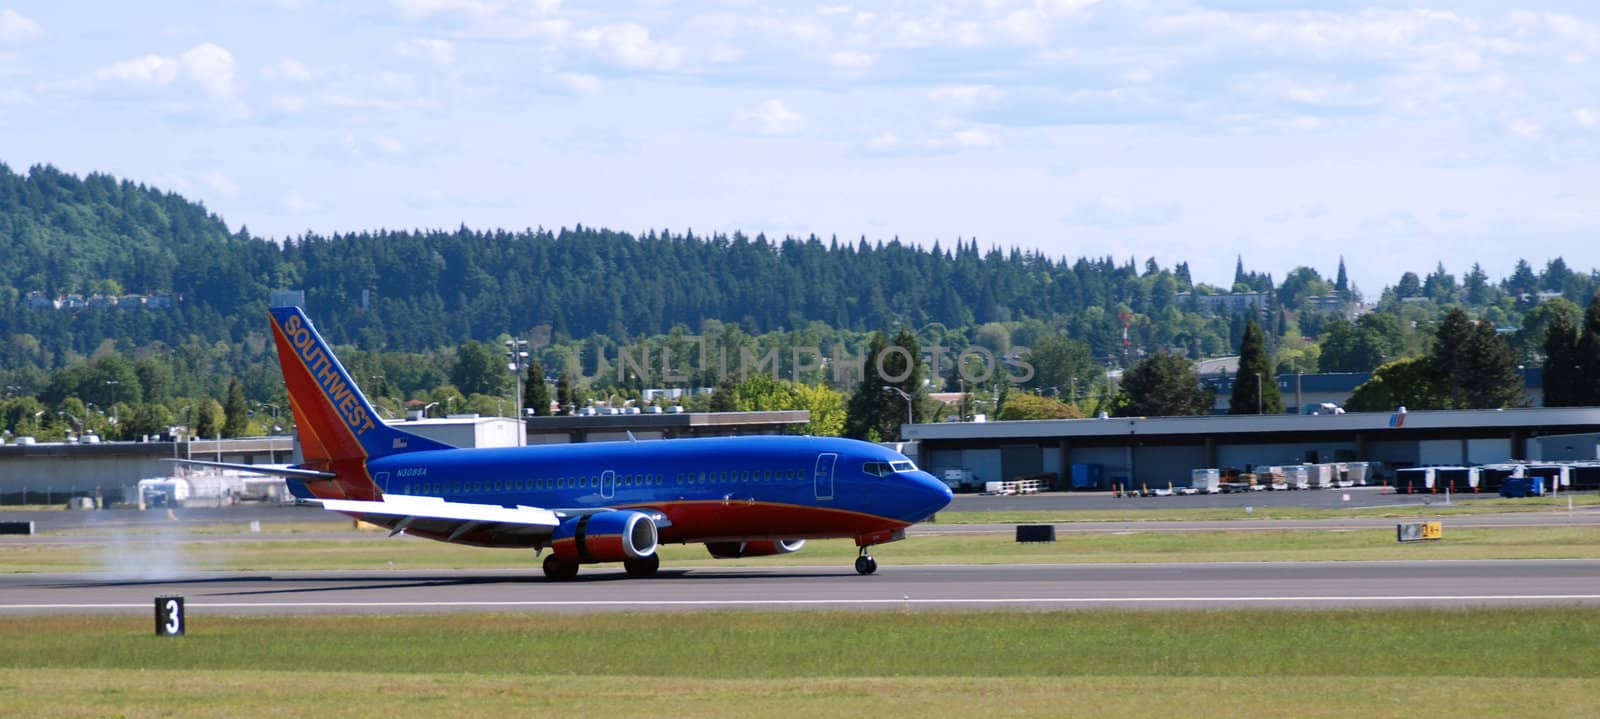 Air craft in the Oregon Sky